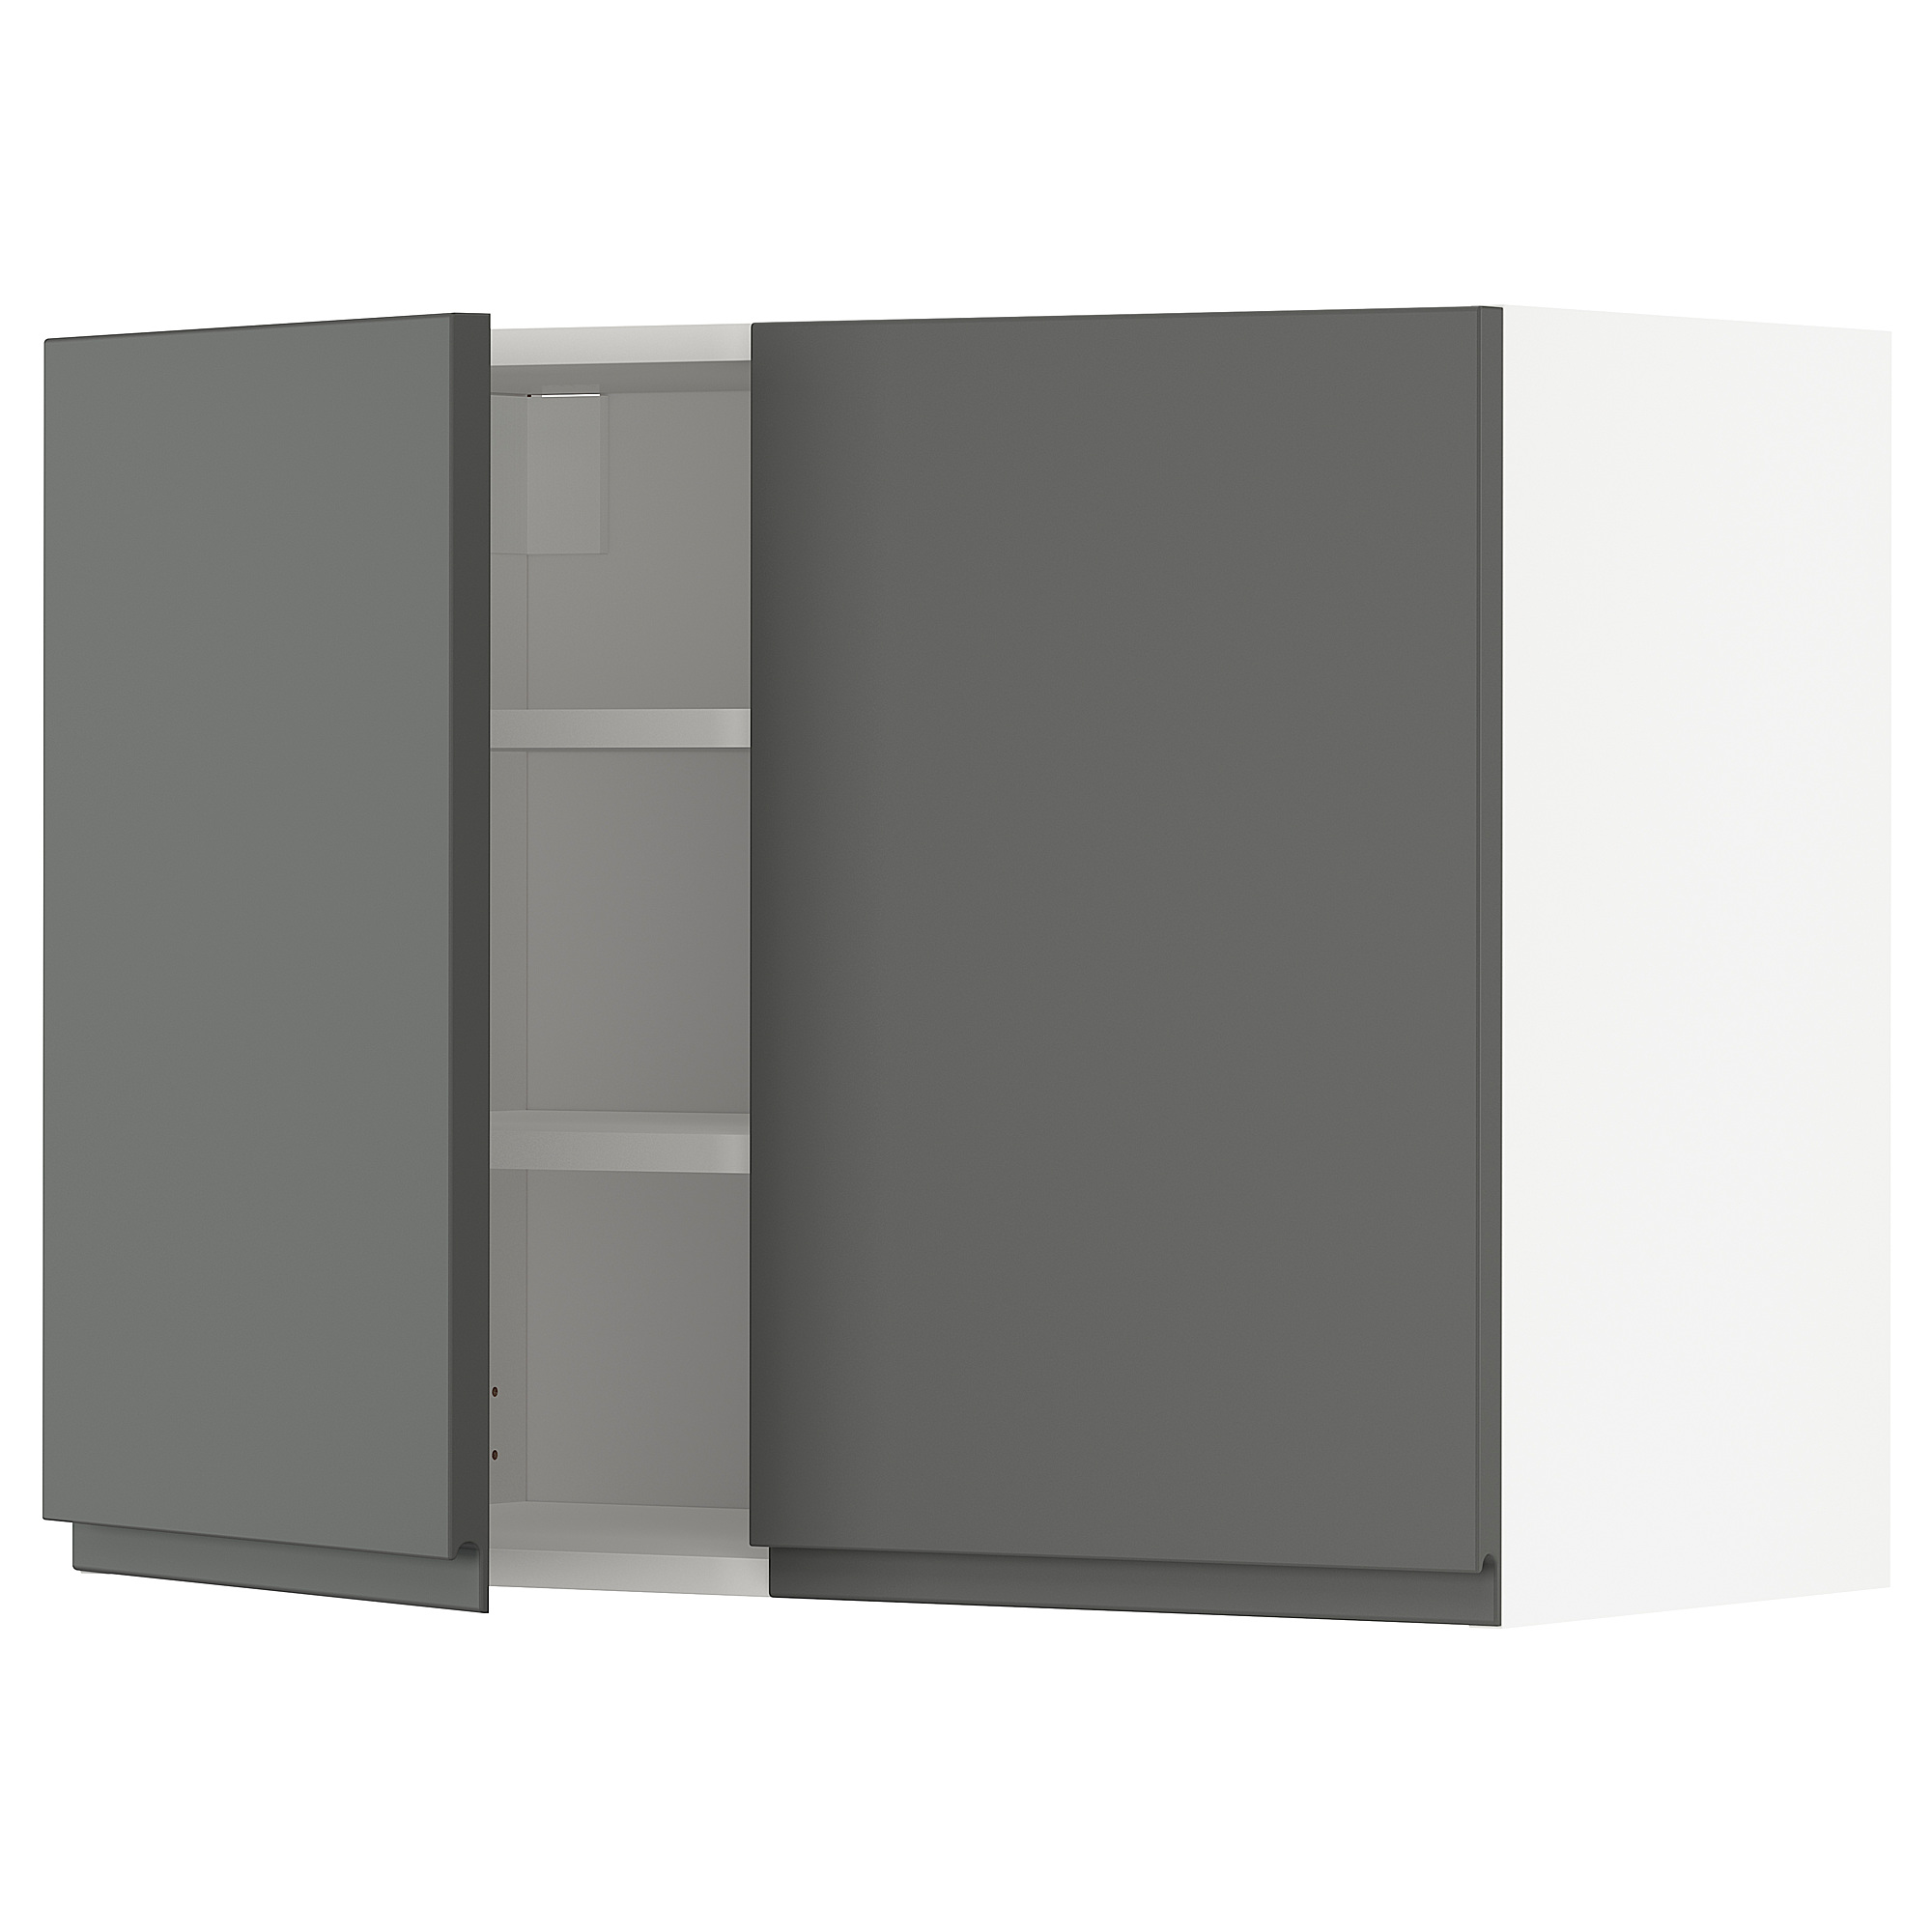 Metod Wall Cabinet With Shelves 2 Doors White Voxtorp Dark Grey Ikea Indonesia